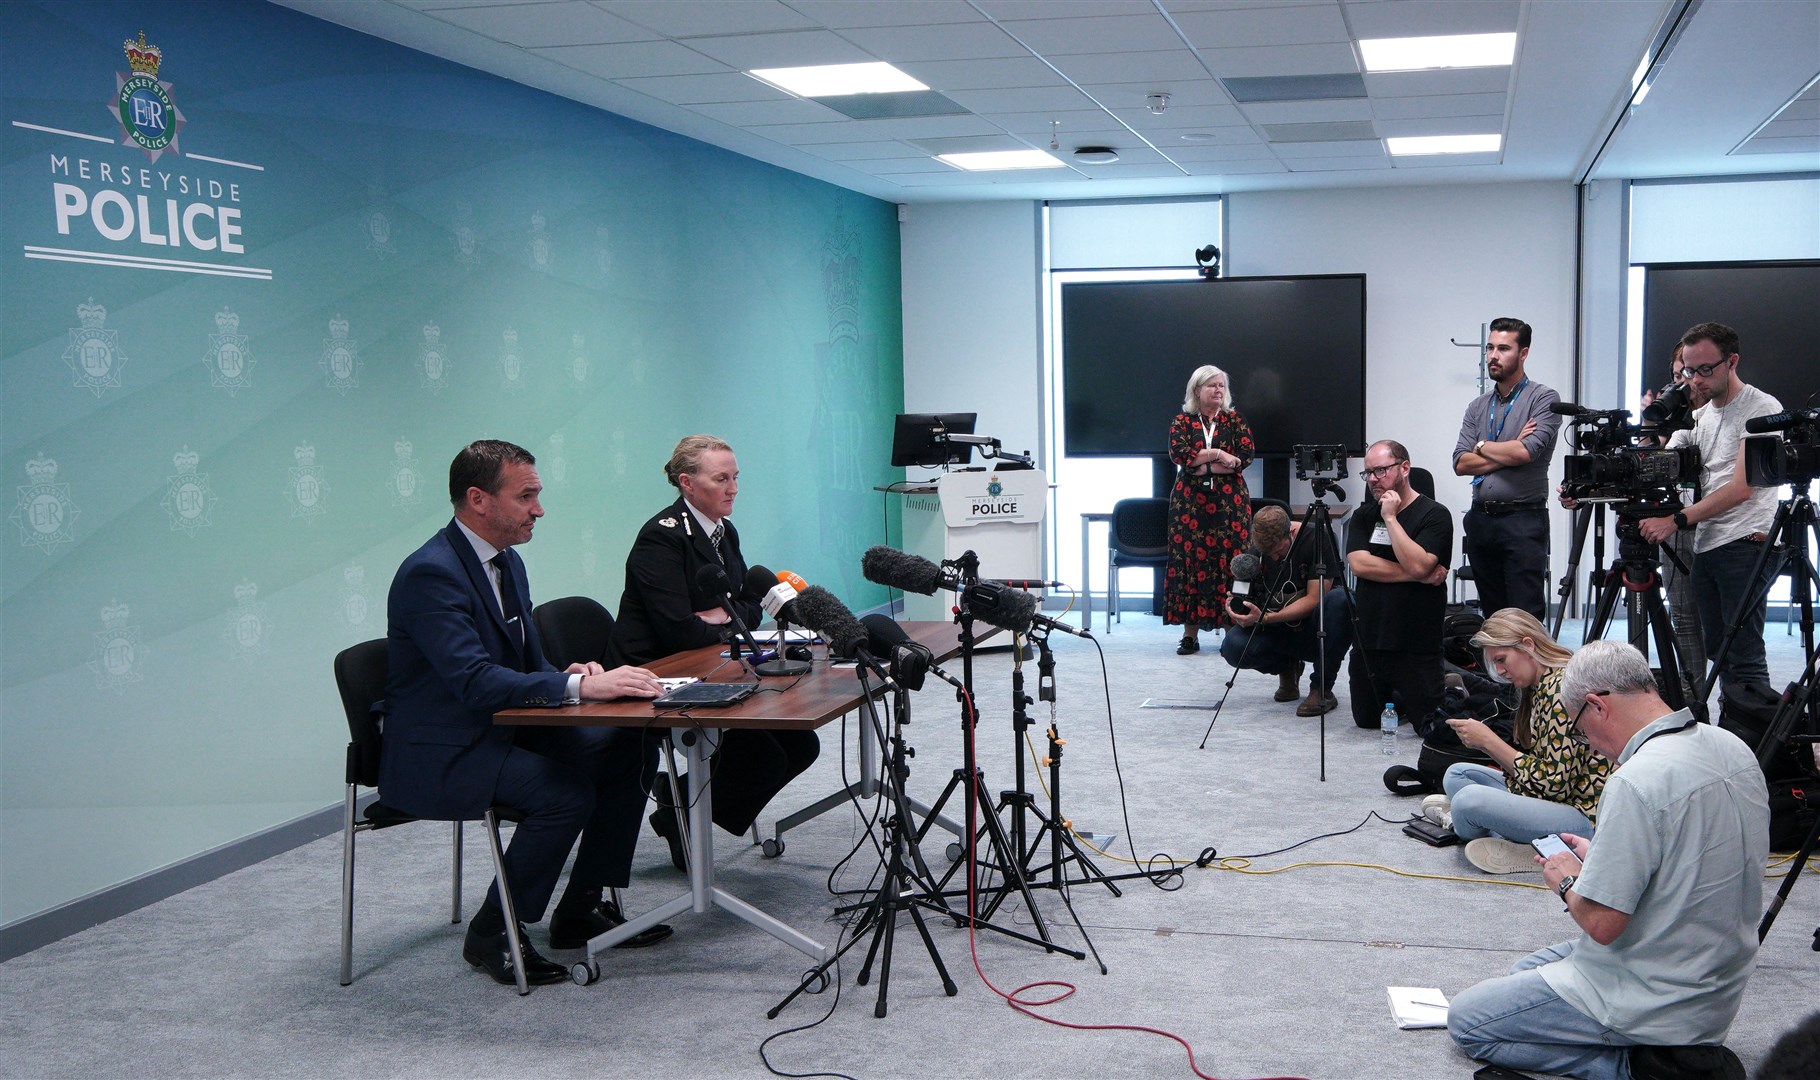 DCS Mark Kameen and Chief Constable Serena Kennedy from Merseyside Police speak to the media after Olivia Pratt-Korbel’s death (Peter Byrne/PA)